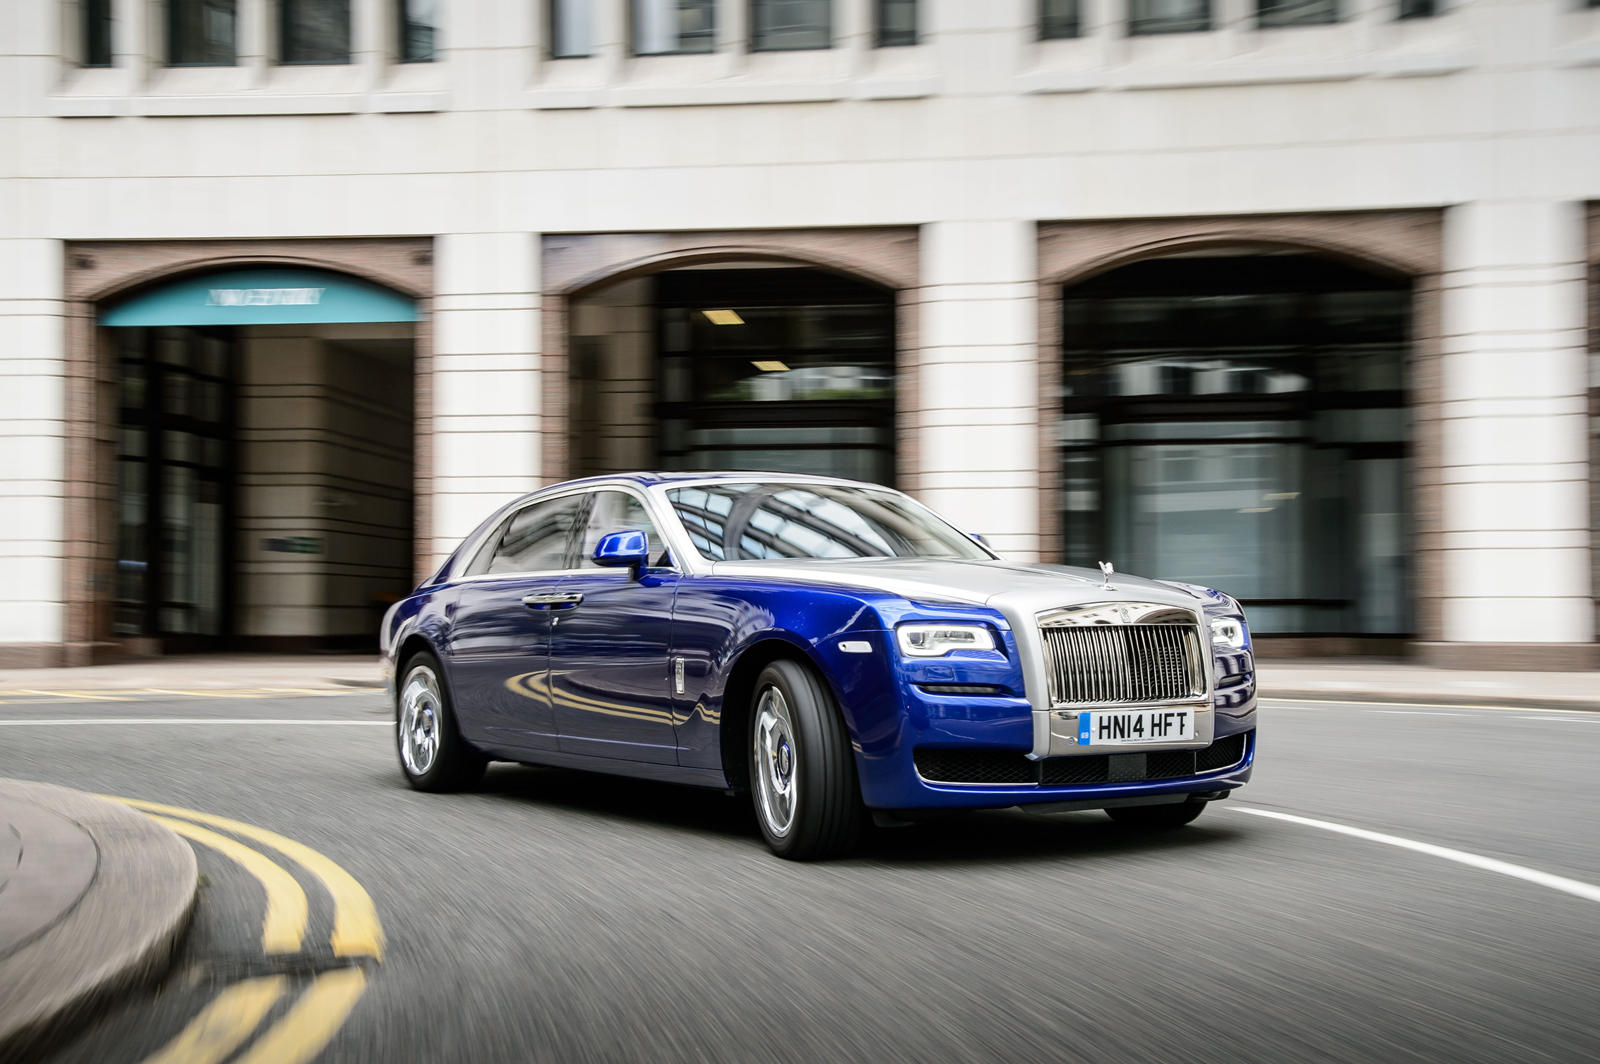 Rolls-Royce Ghost Review, Interior, For Sale, Specs & Models in